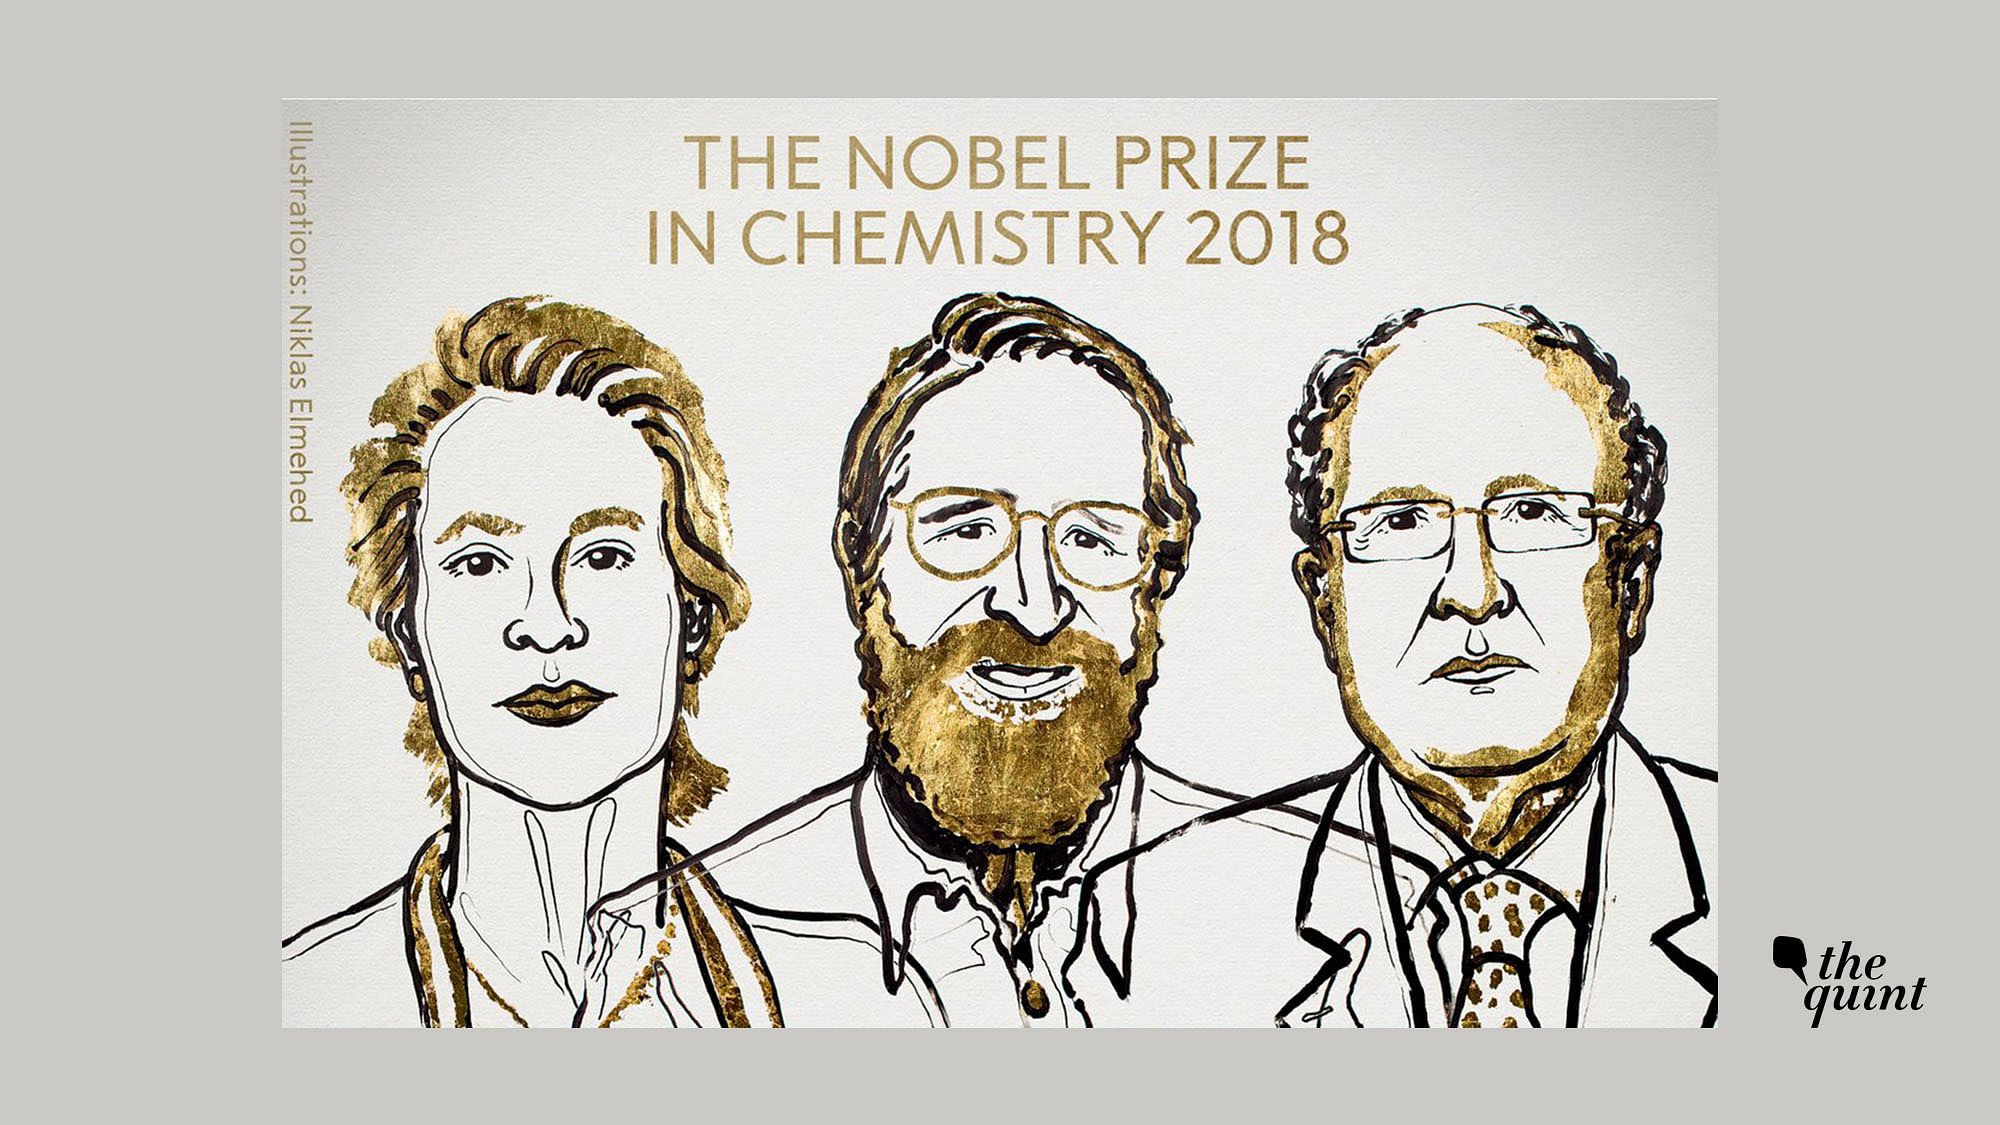 Frances H Arnold , George P Smith and Sir Gregory P Winter won the 2018 Nobel Prize in Chemistry.